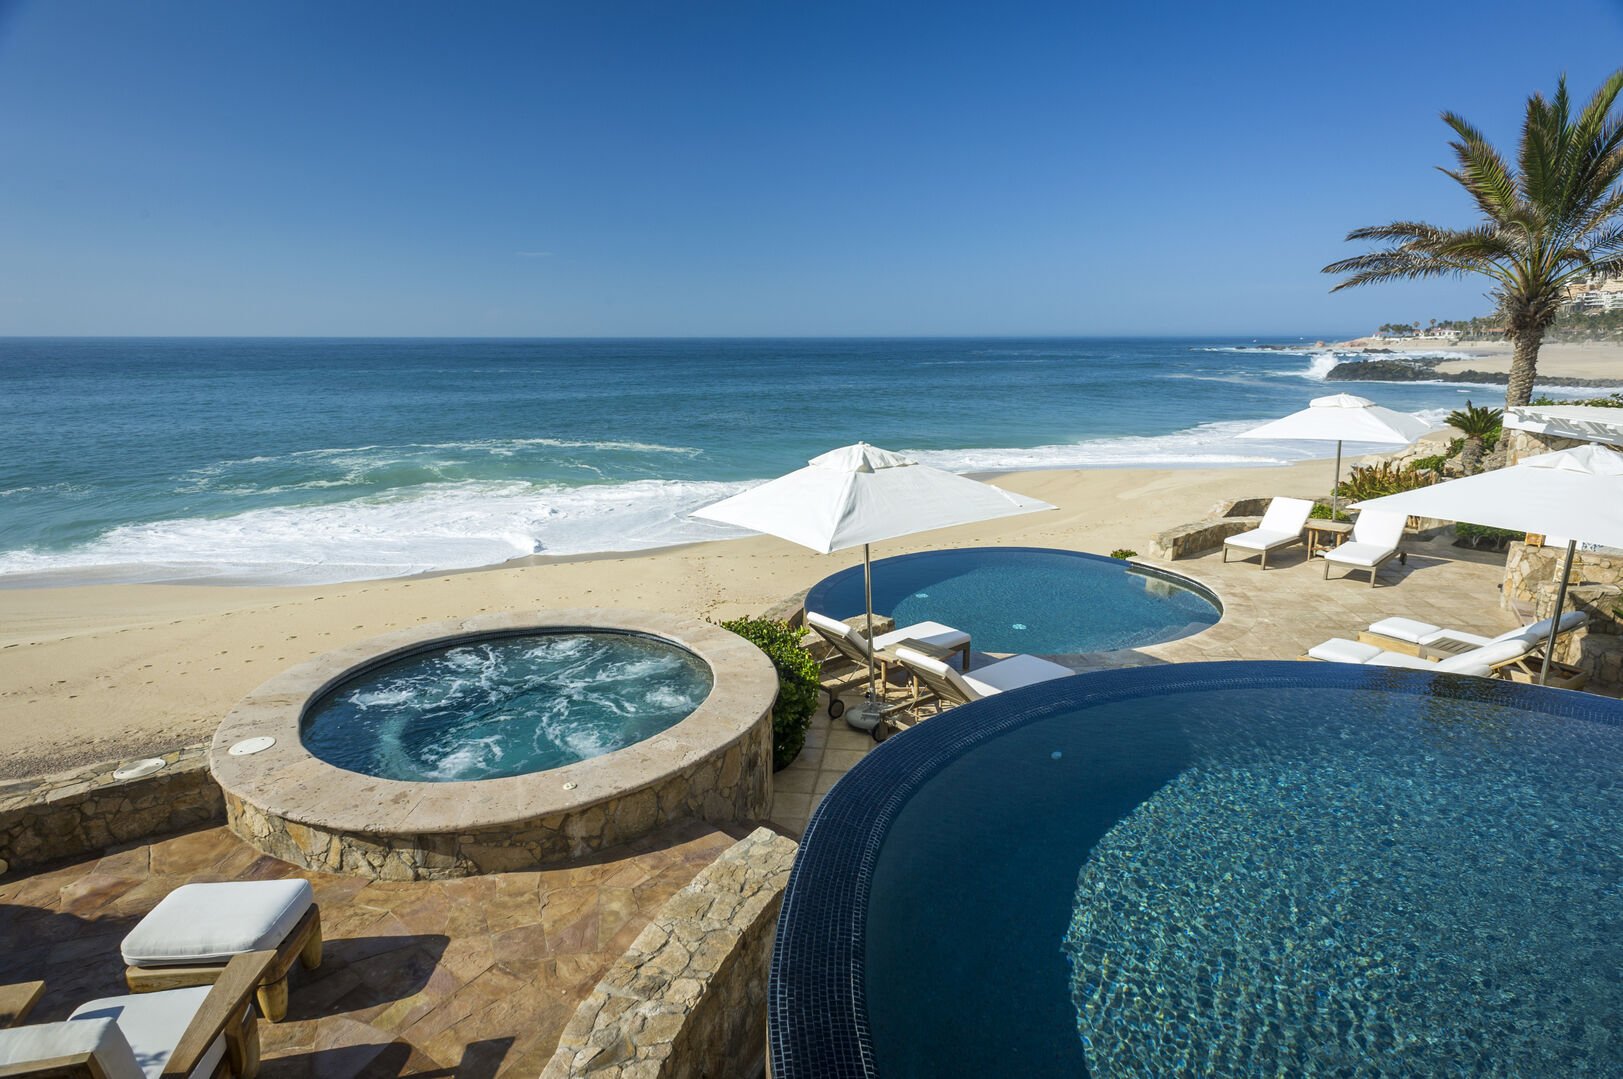 A jacuzzi and an outdoor lounge area by the beach